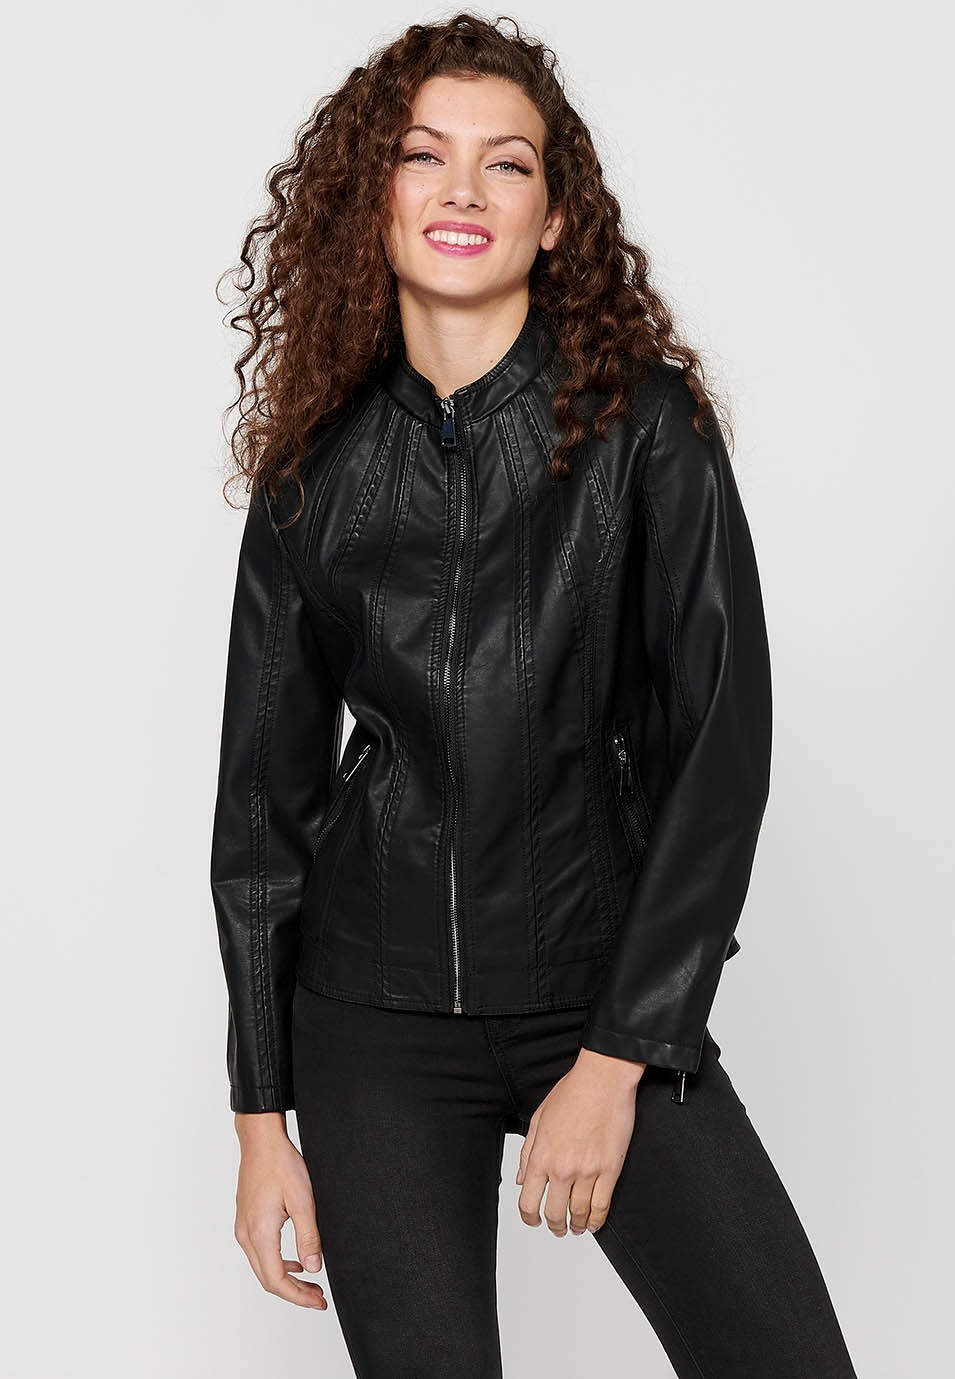 Long Sleeve Jacket with Round High Neck and Front Zipper Closure in Black for Women 1